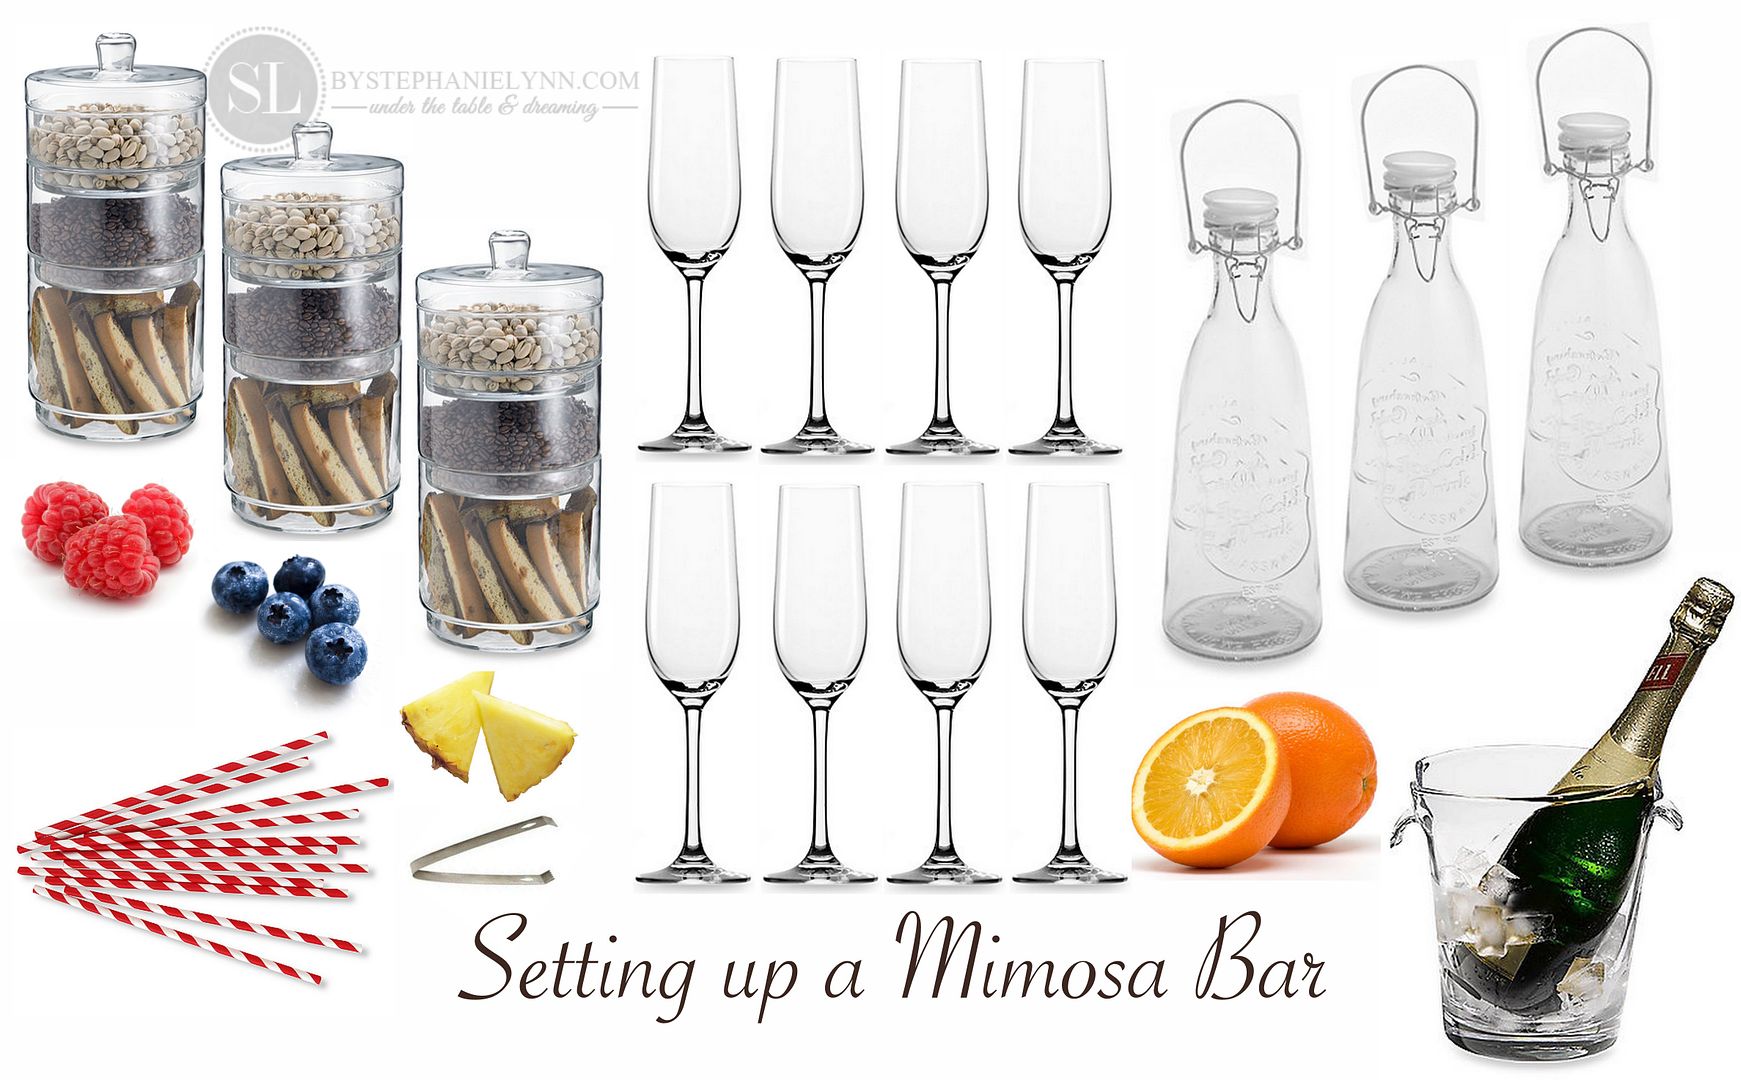 How to Set up a Mimosa Bar